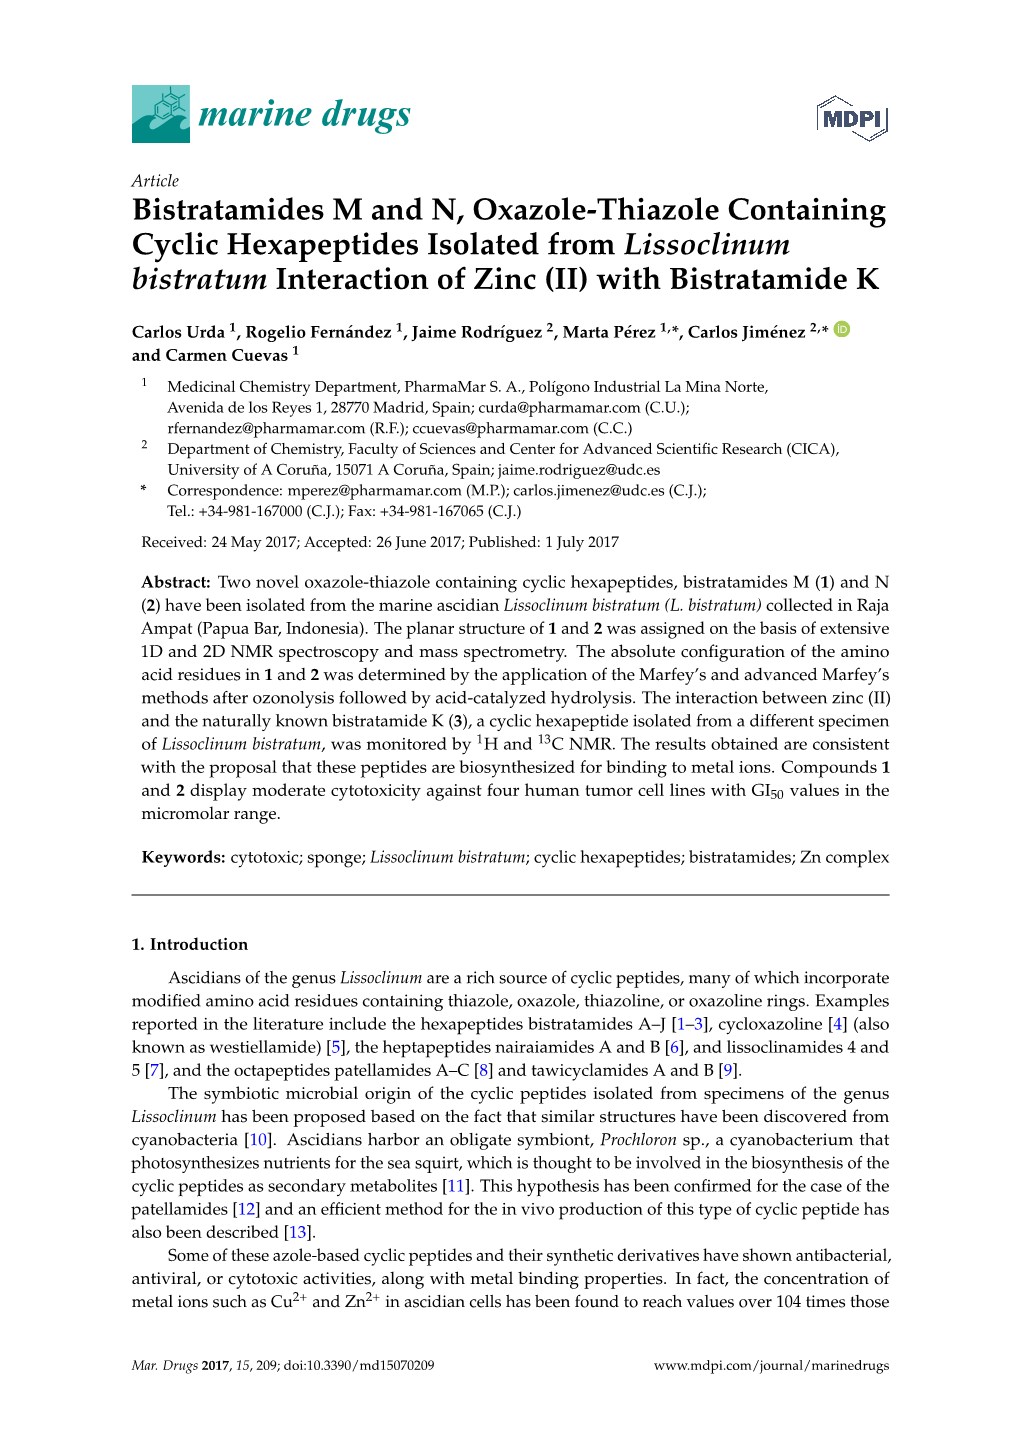 Bistratamides M and N, Oxazole-Thiazole Containing Cyclic Hexapeptides Isolated from Lissoclinum Bistratum Interaction of Zinc (II) with Bistratamide K